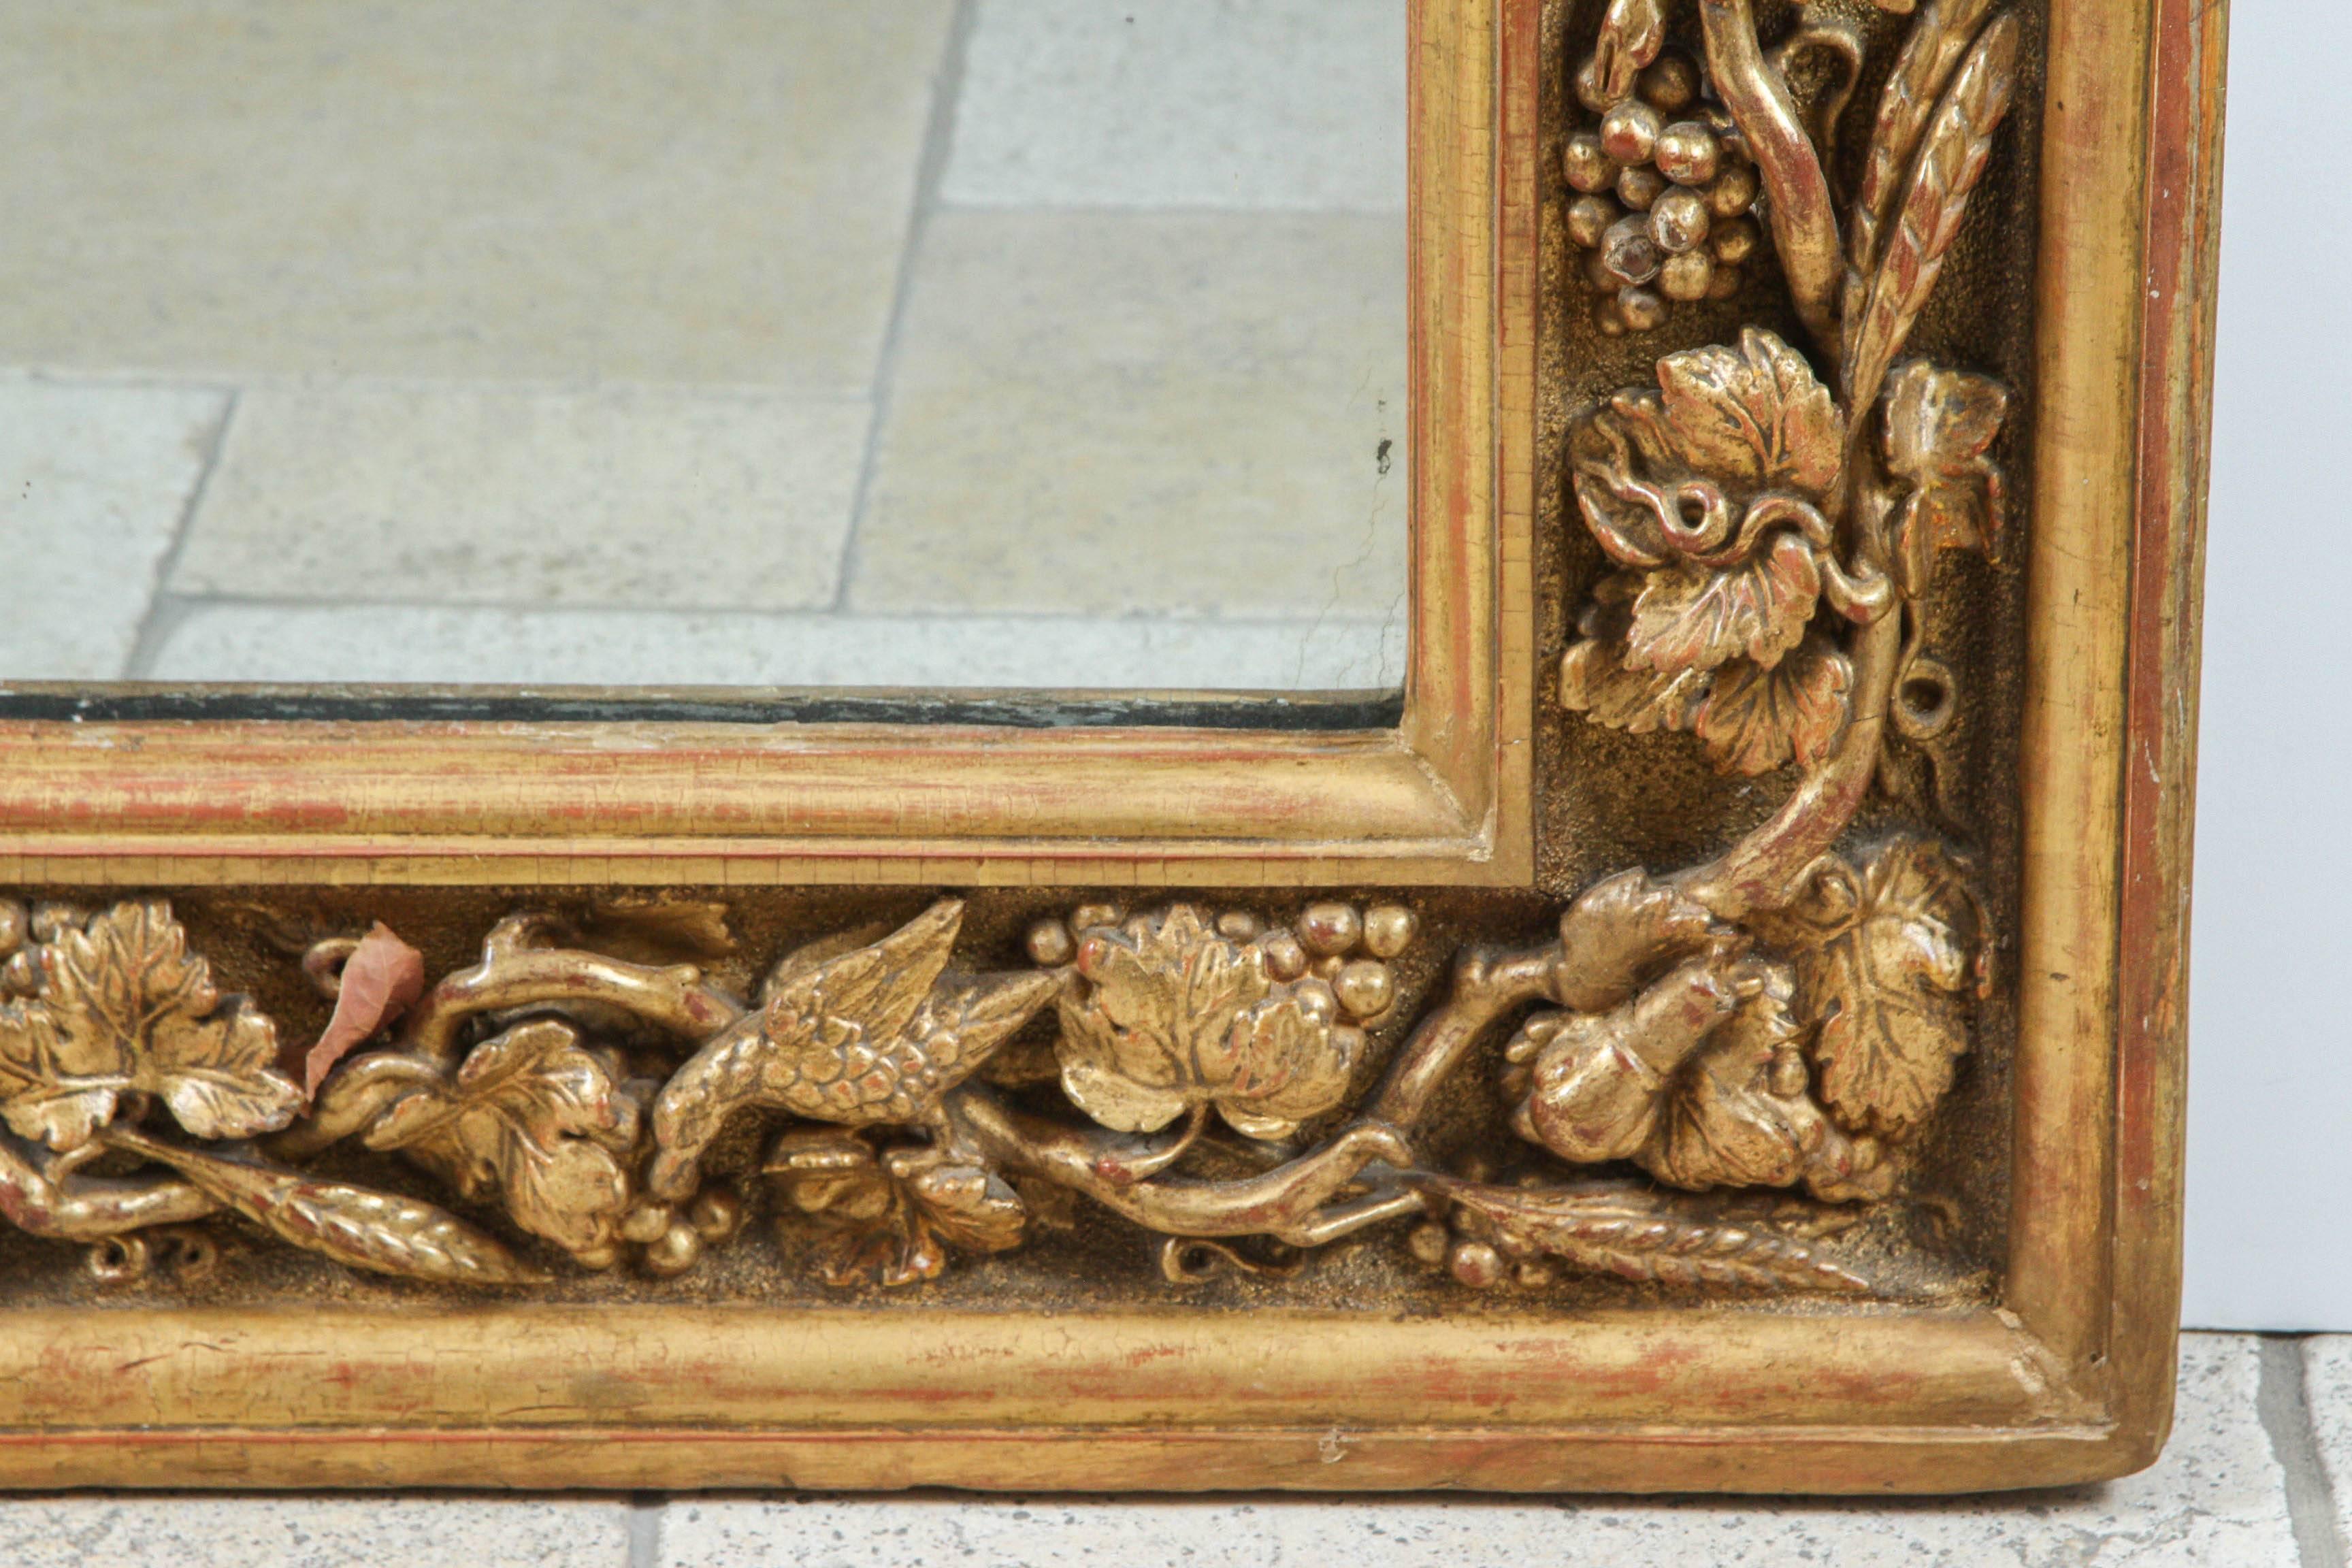 18th century English carved giltwood mirror with tree of life motif featuring snakes, snails and birds. The mirror interior measurements are: 42 inches wide x 61 inches high. There is a makers mark incised in the giltwood.